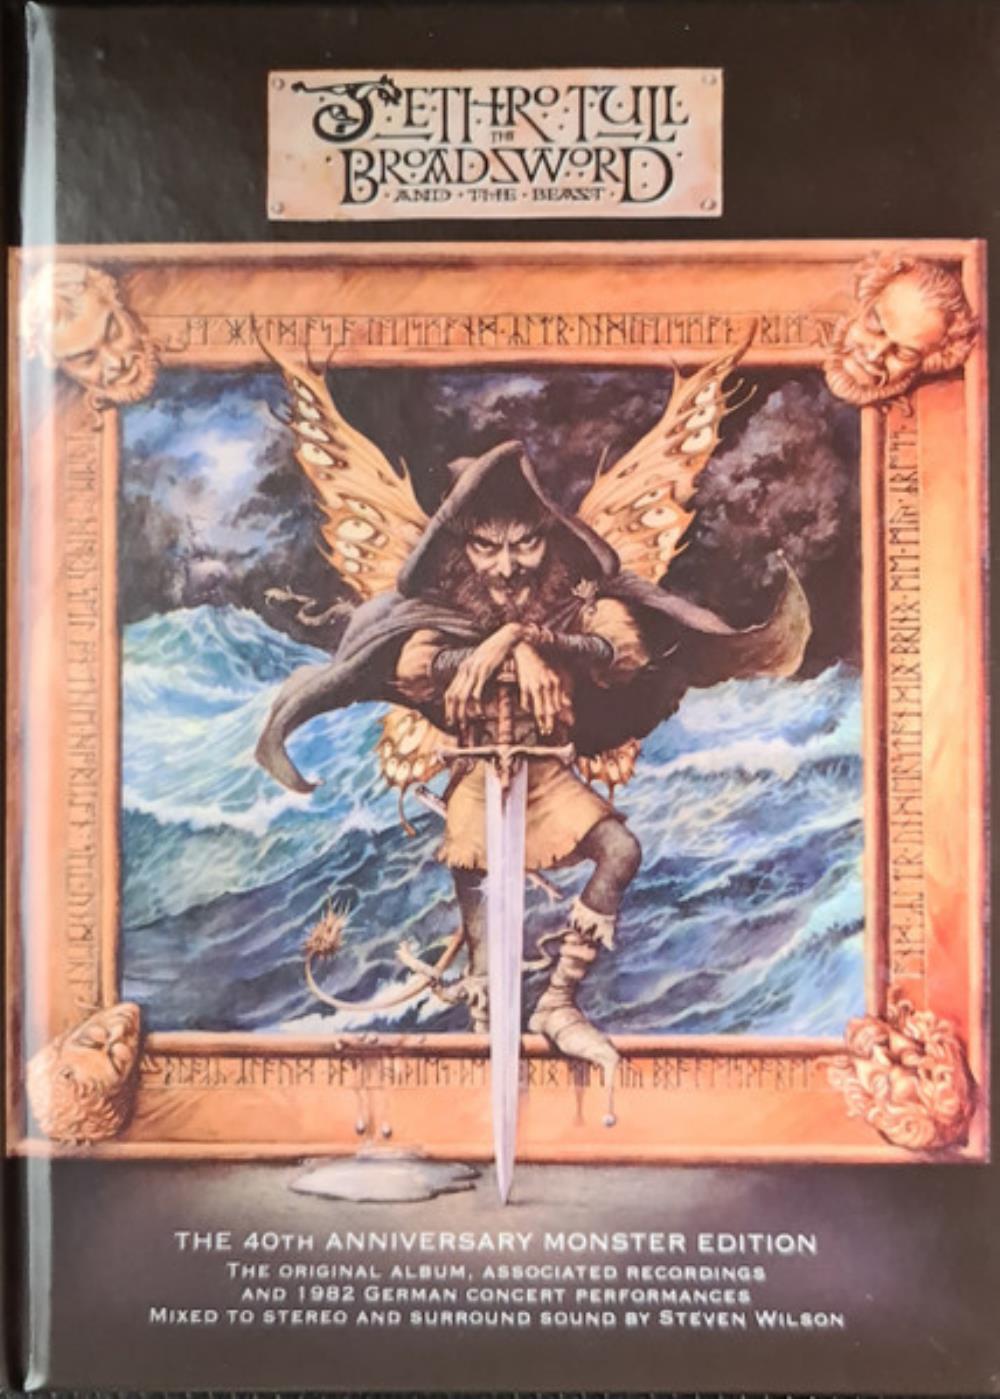 Jethro Tull - The Broadsword And The Beast (The 40th Anniversary Monster Edition) CD (album) cover